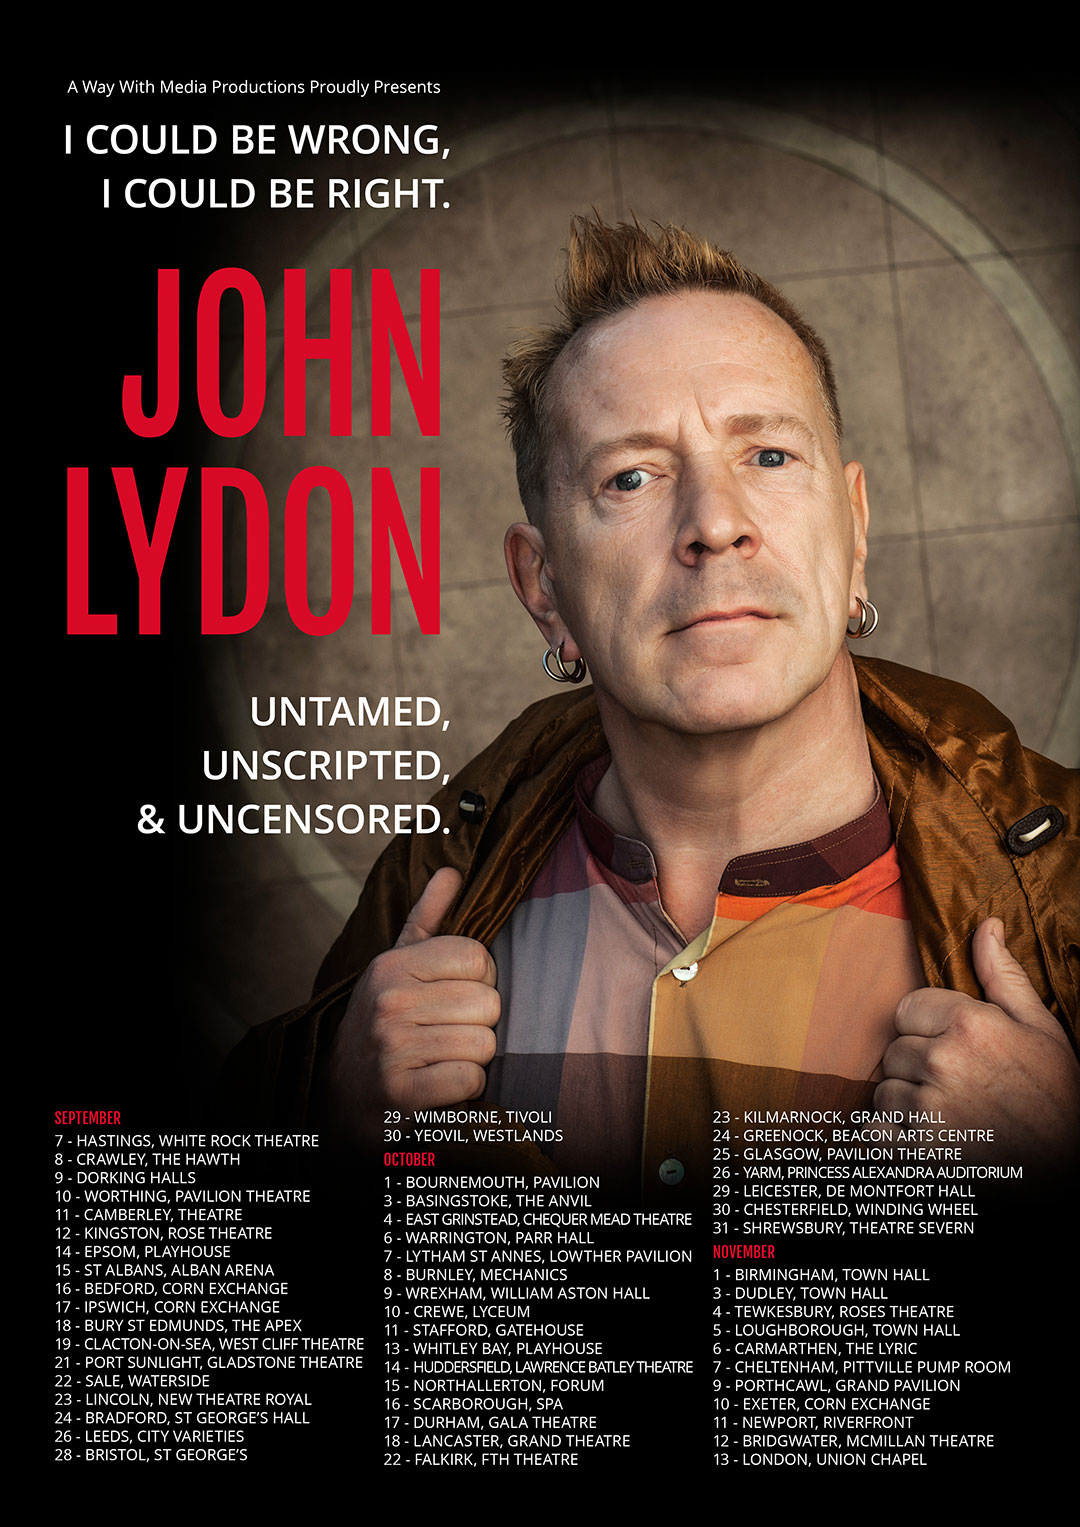 John Lydon I Could Be Wrong, I Could Be Right Q&A Tour 2021 